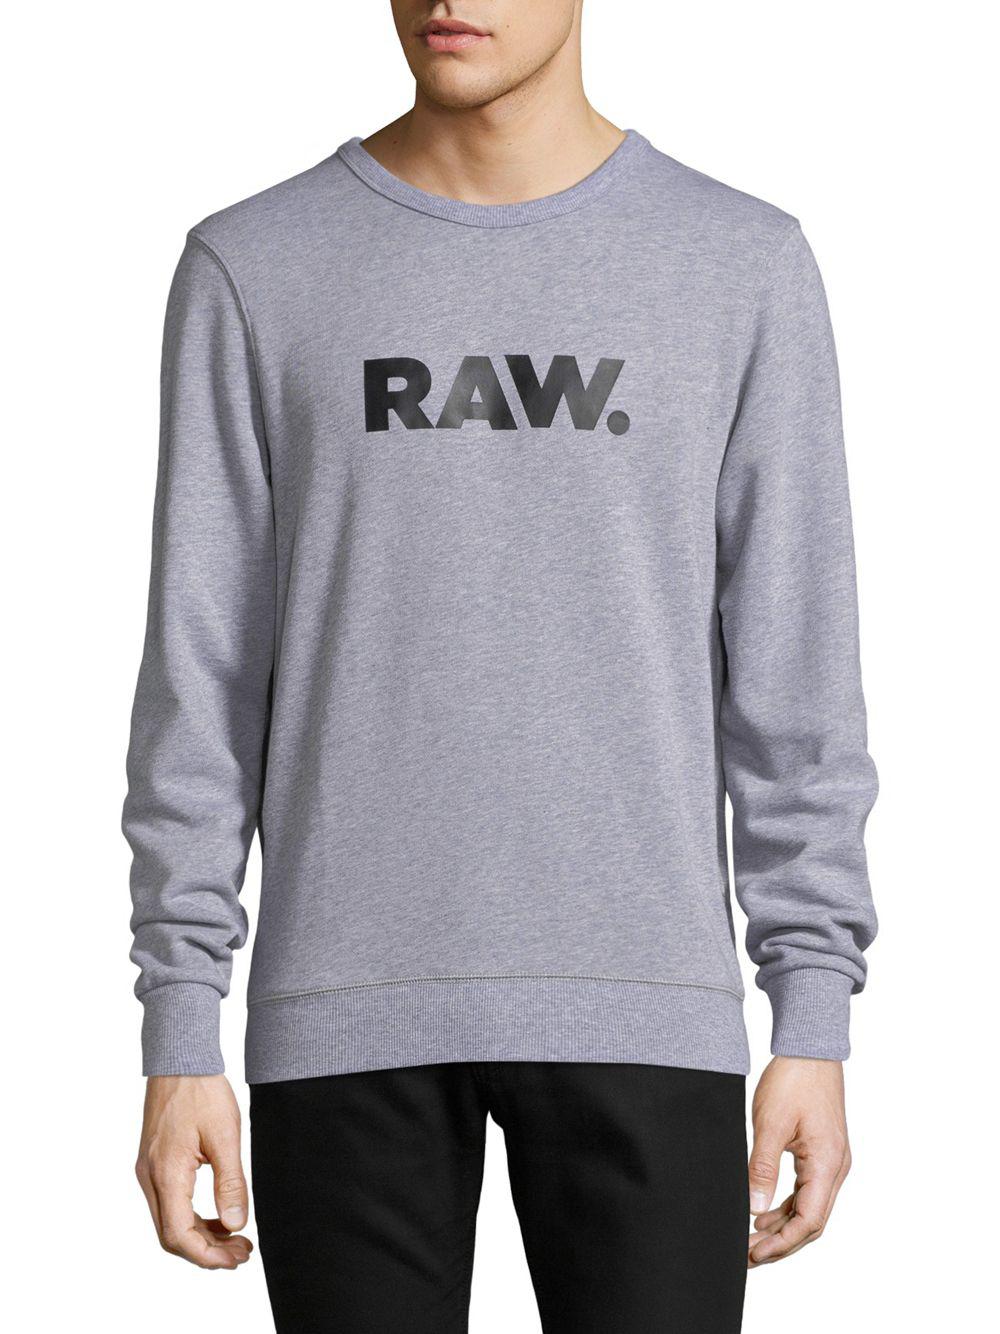 G Star Raw Crewneck Off 51 Online Shopping Site For Fashion Lifestyle